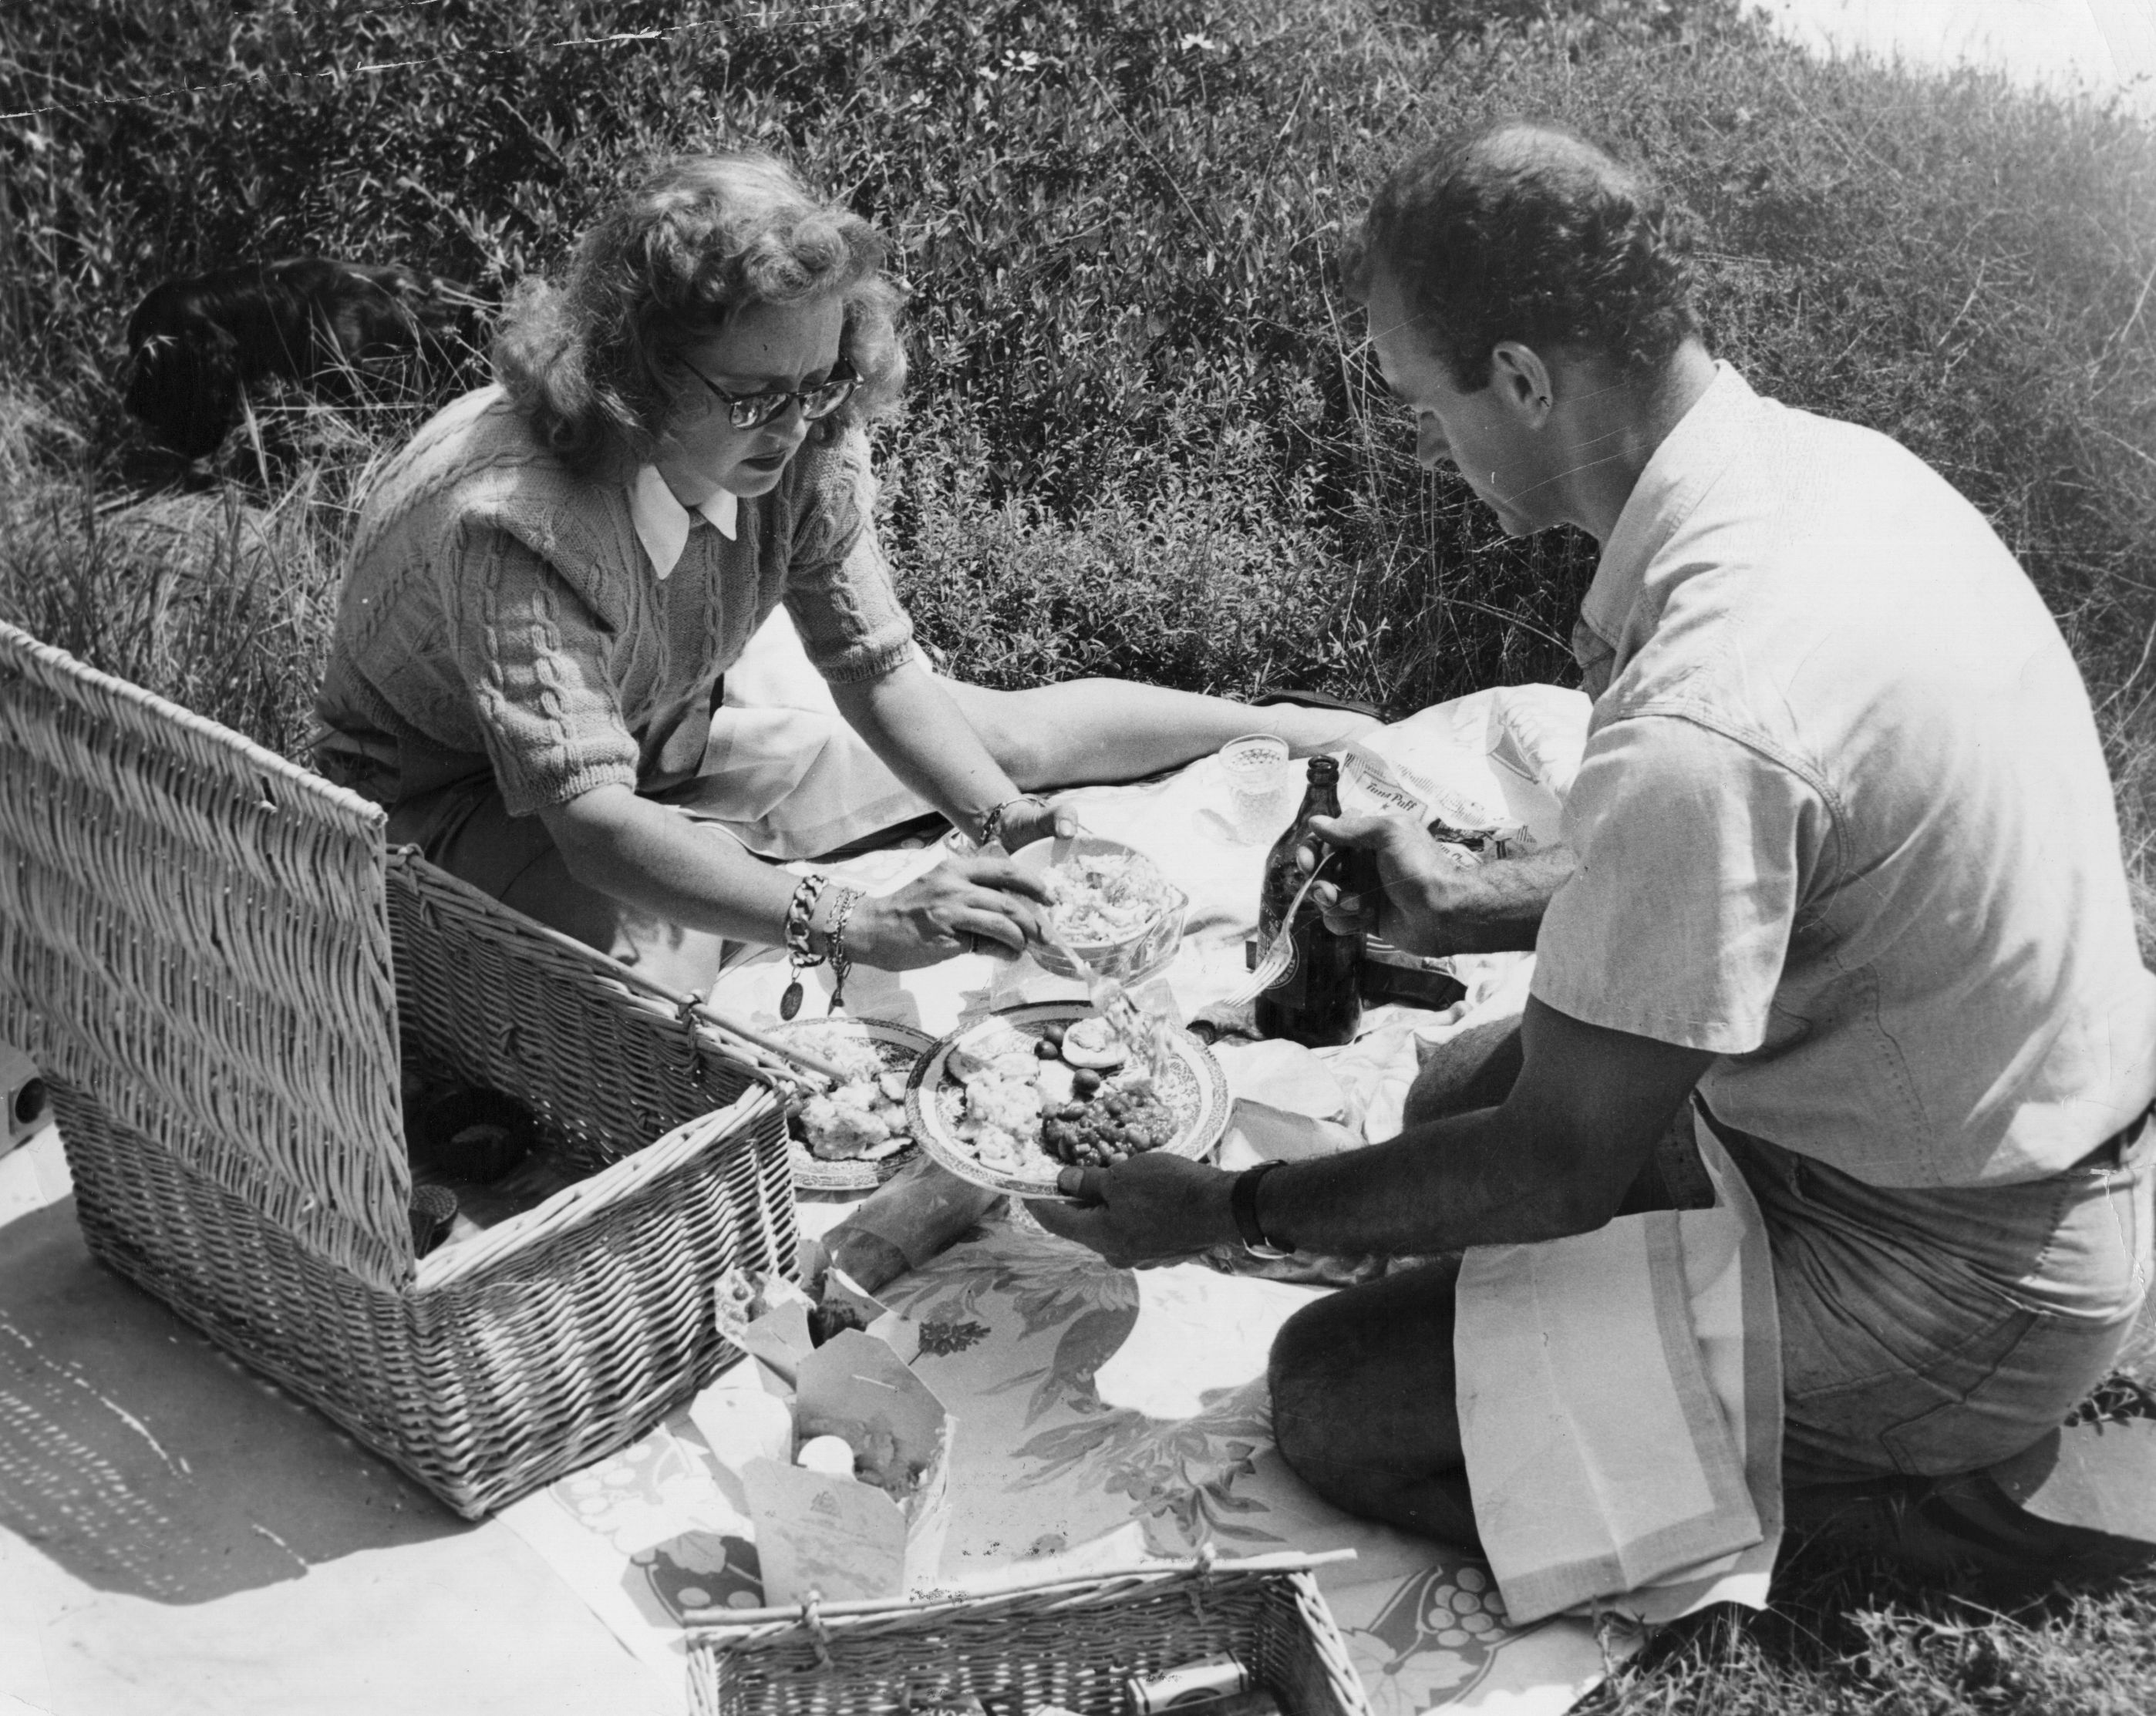 Bette Davis in 1947 enjoying a picnic with husband William Grant Sherry